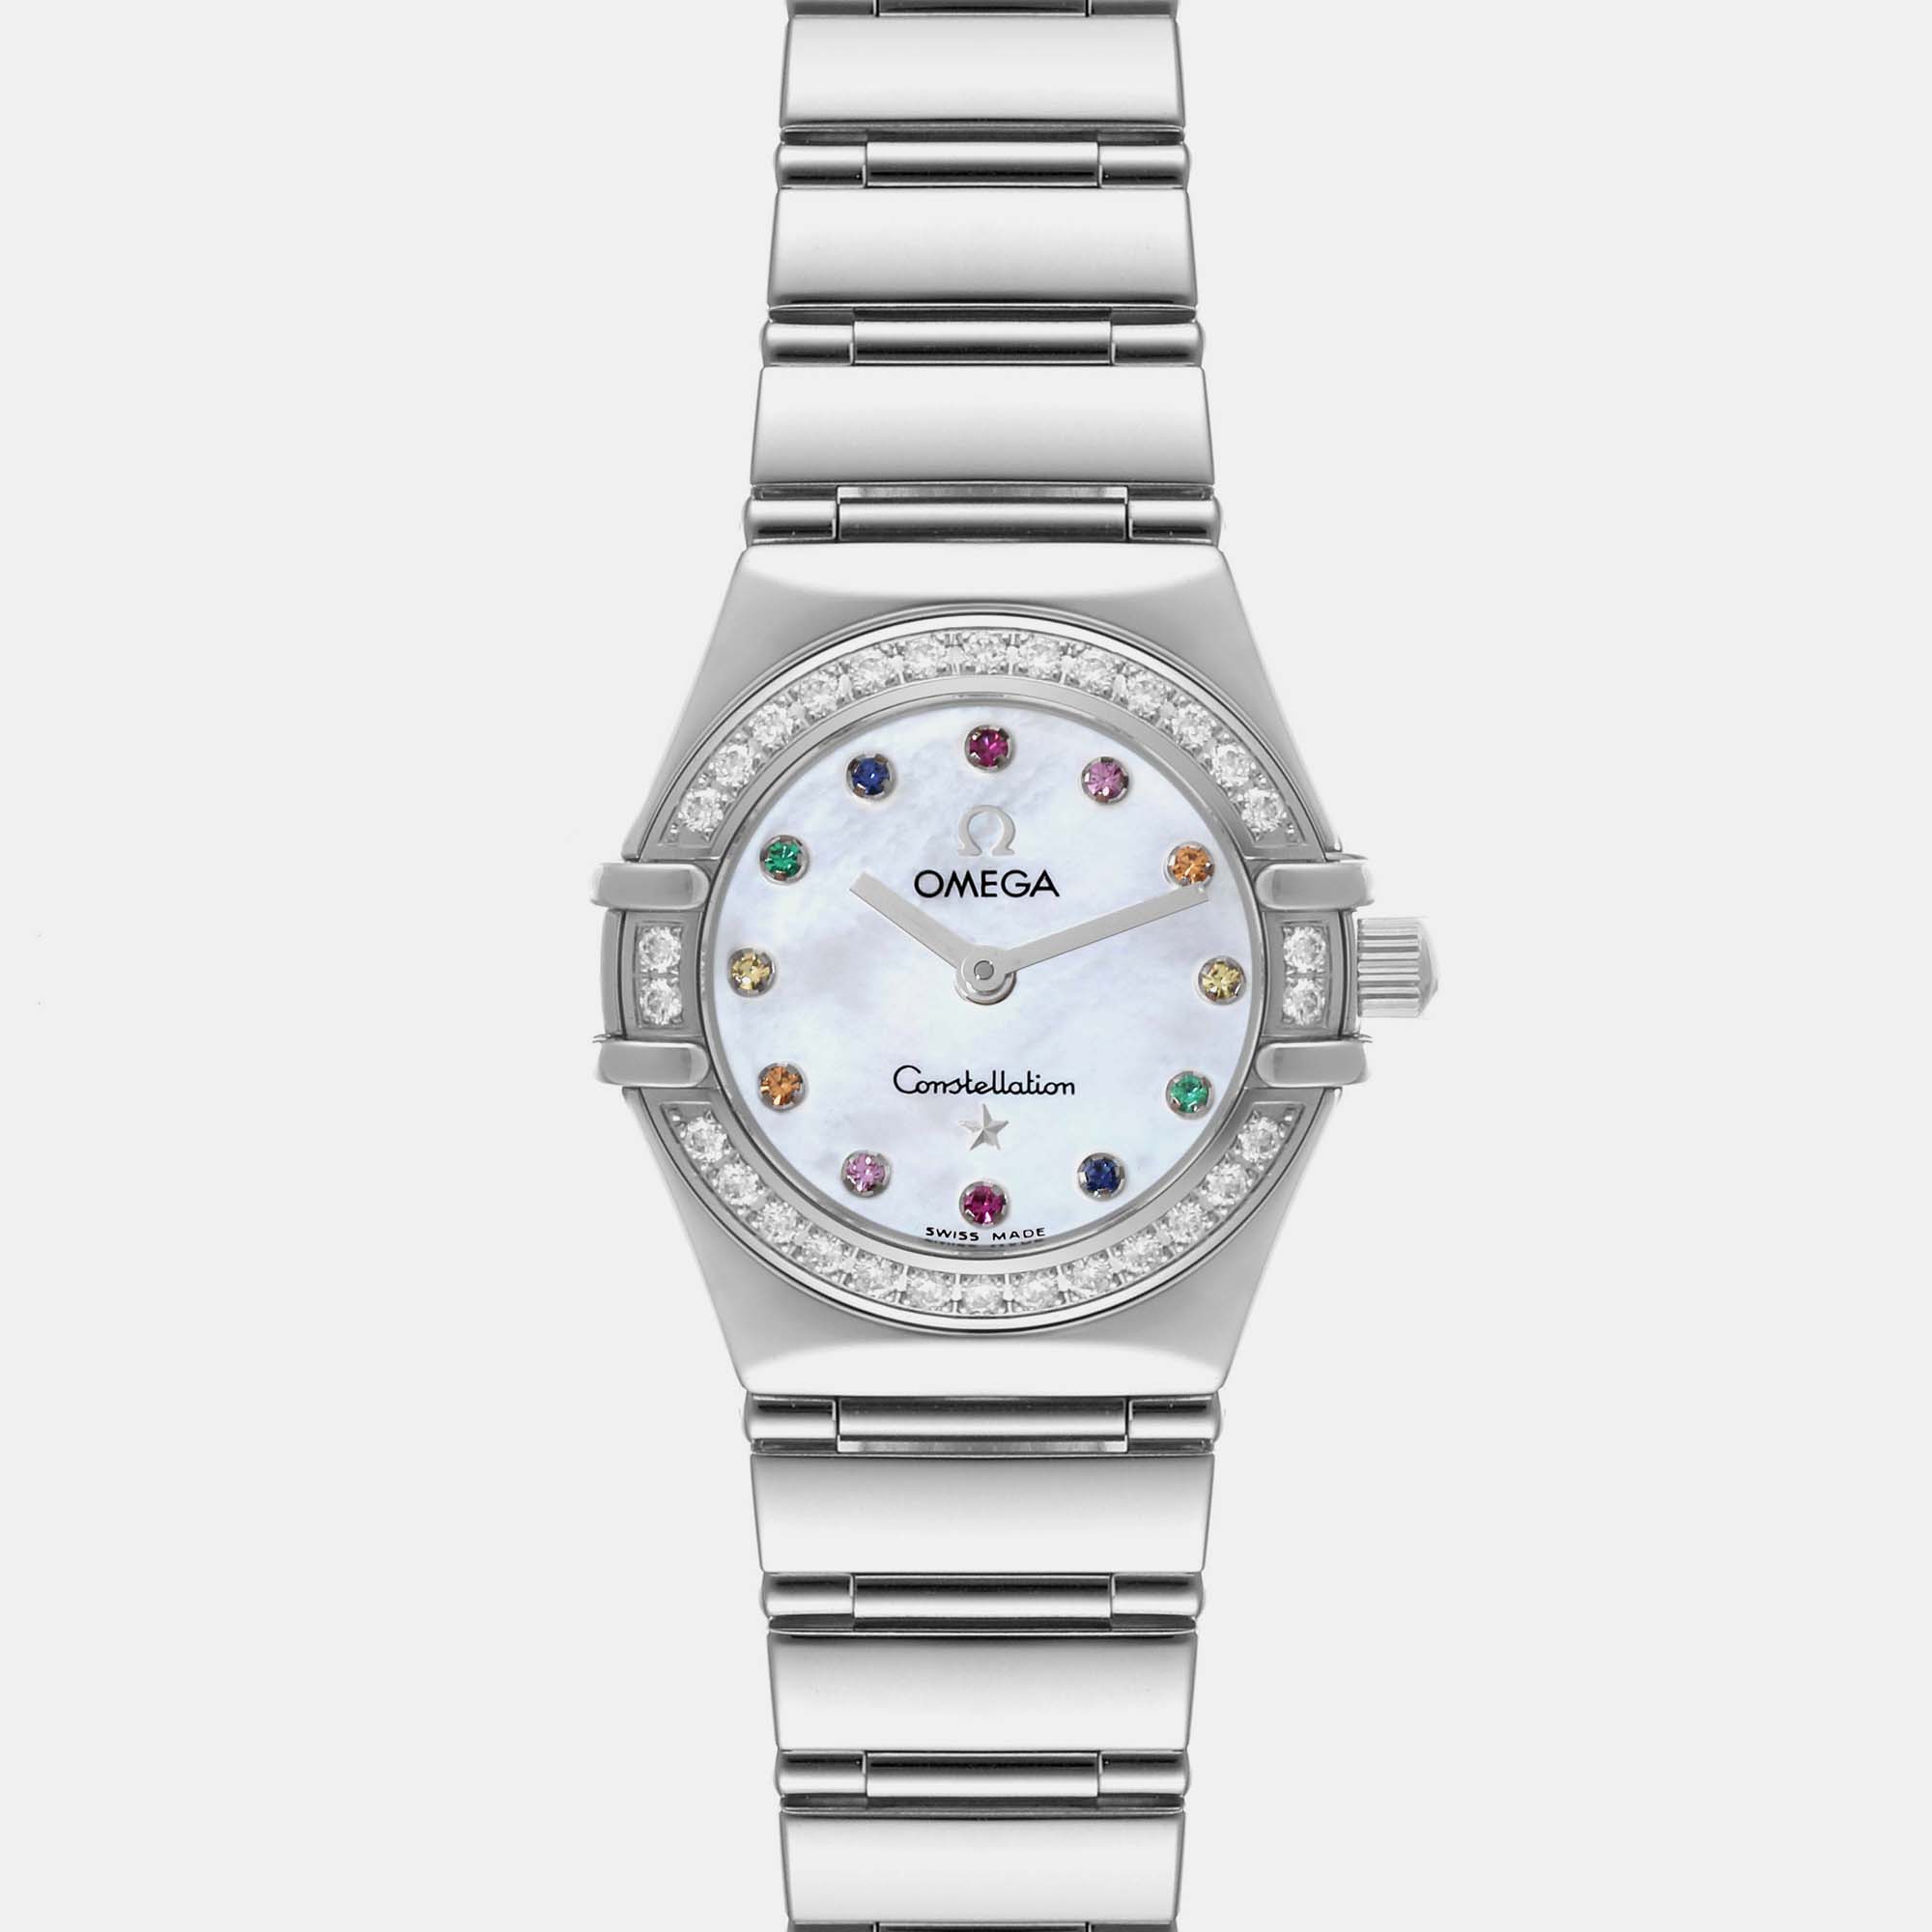 Omega Mother Of Pearl Diamond Stainless Steel Constellation 1460.79.00 Quartz Women's Wristwatch 22.5 Mm